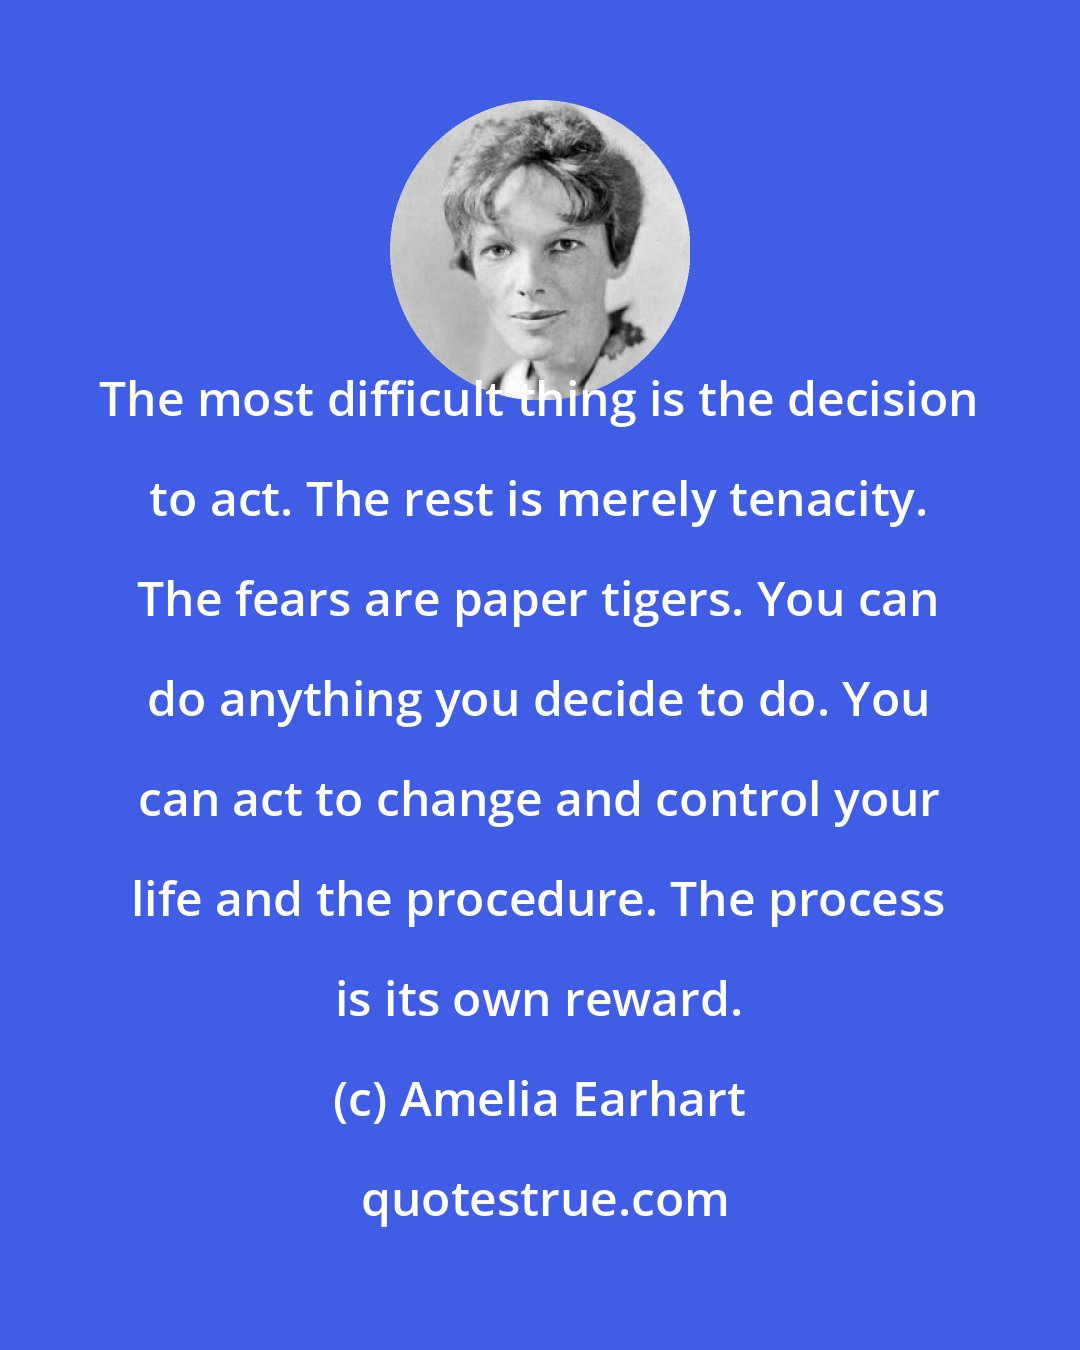 Amelia Earhart: The most difficult thing is the decision to act. The rest is merely tenacity. The fears are paper tigers. You can do anything you decide to do. You can act to change and control your life and the procedure. The process is its own reward.